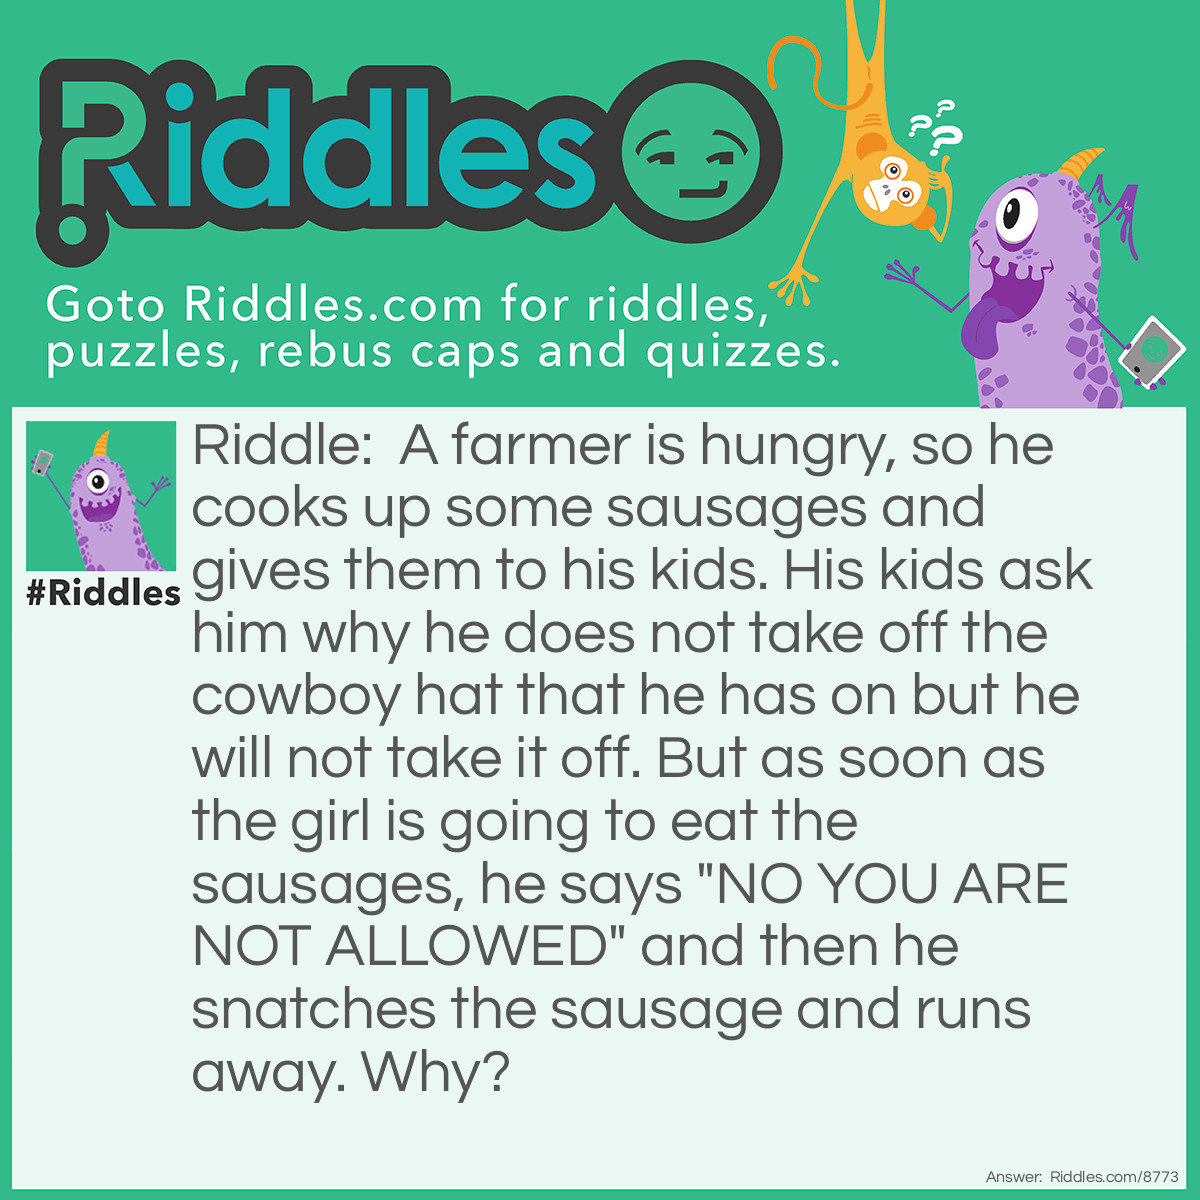 Riddle: A farmer is hungry, so he cooks up some sausages and gives them to his kids. His kids ask him why he does not take off the cowboy hat that he has on but he will not take it off. But as soon as the girl is going to eat the sausages, he says "NO YOU ARE NOT ALLOWED" and then he snatches the sausage and runs away. Why? Answer: The farmer had a fight with a pig and it bit off his ear which made him angry so he made the pig into sausages for his kids. He does not want his kids to know that he has no ear so he does not take off the cowboy hat. But when he gives the sausages to the girl, he sees his ear sticking out of the sausage. So she is not allowed to eat it and he must get the sausage to the doctor so they can put it back on.